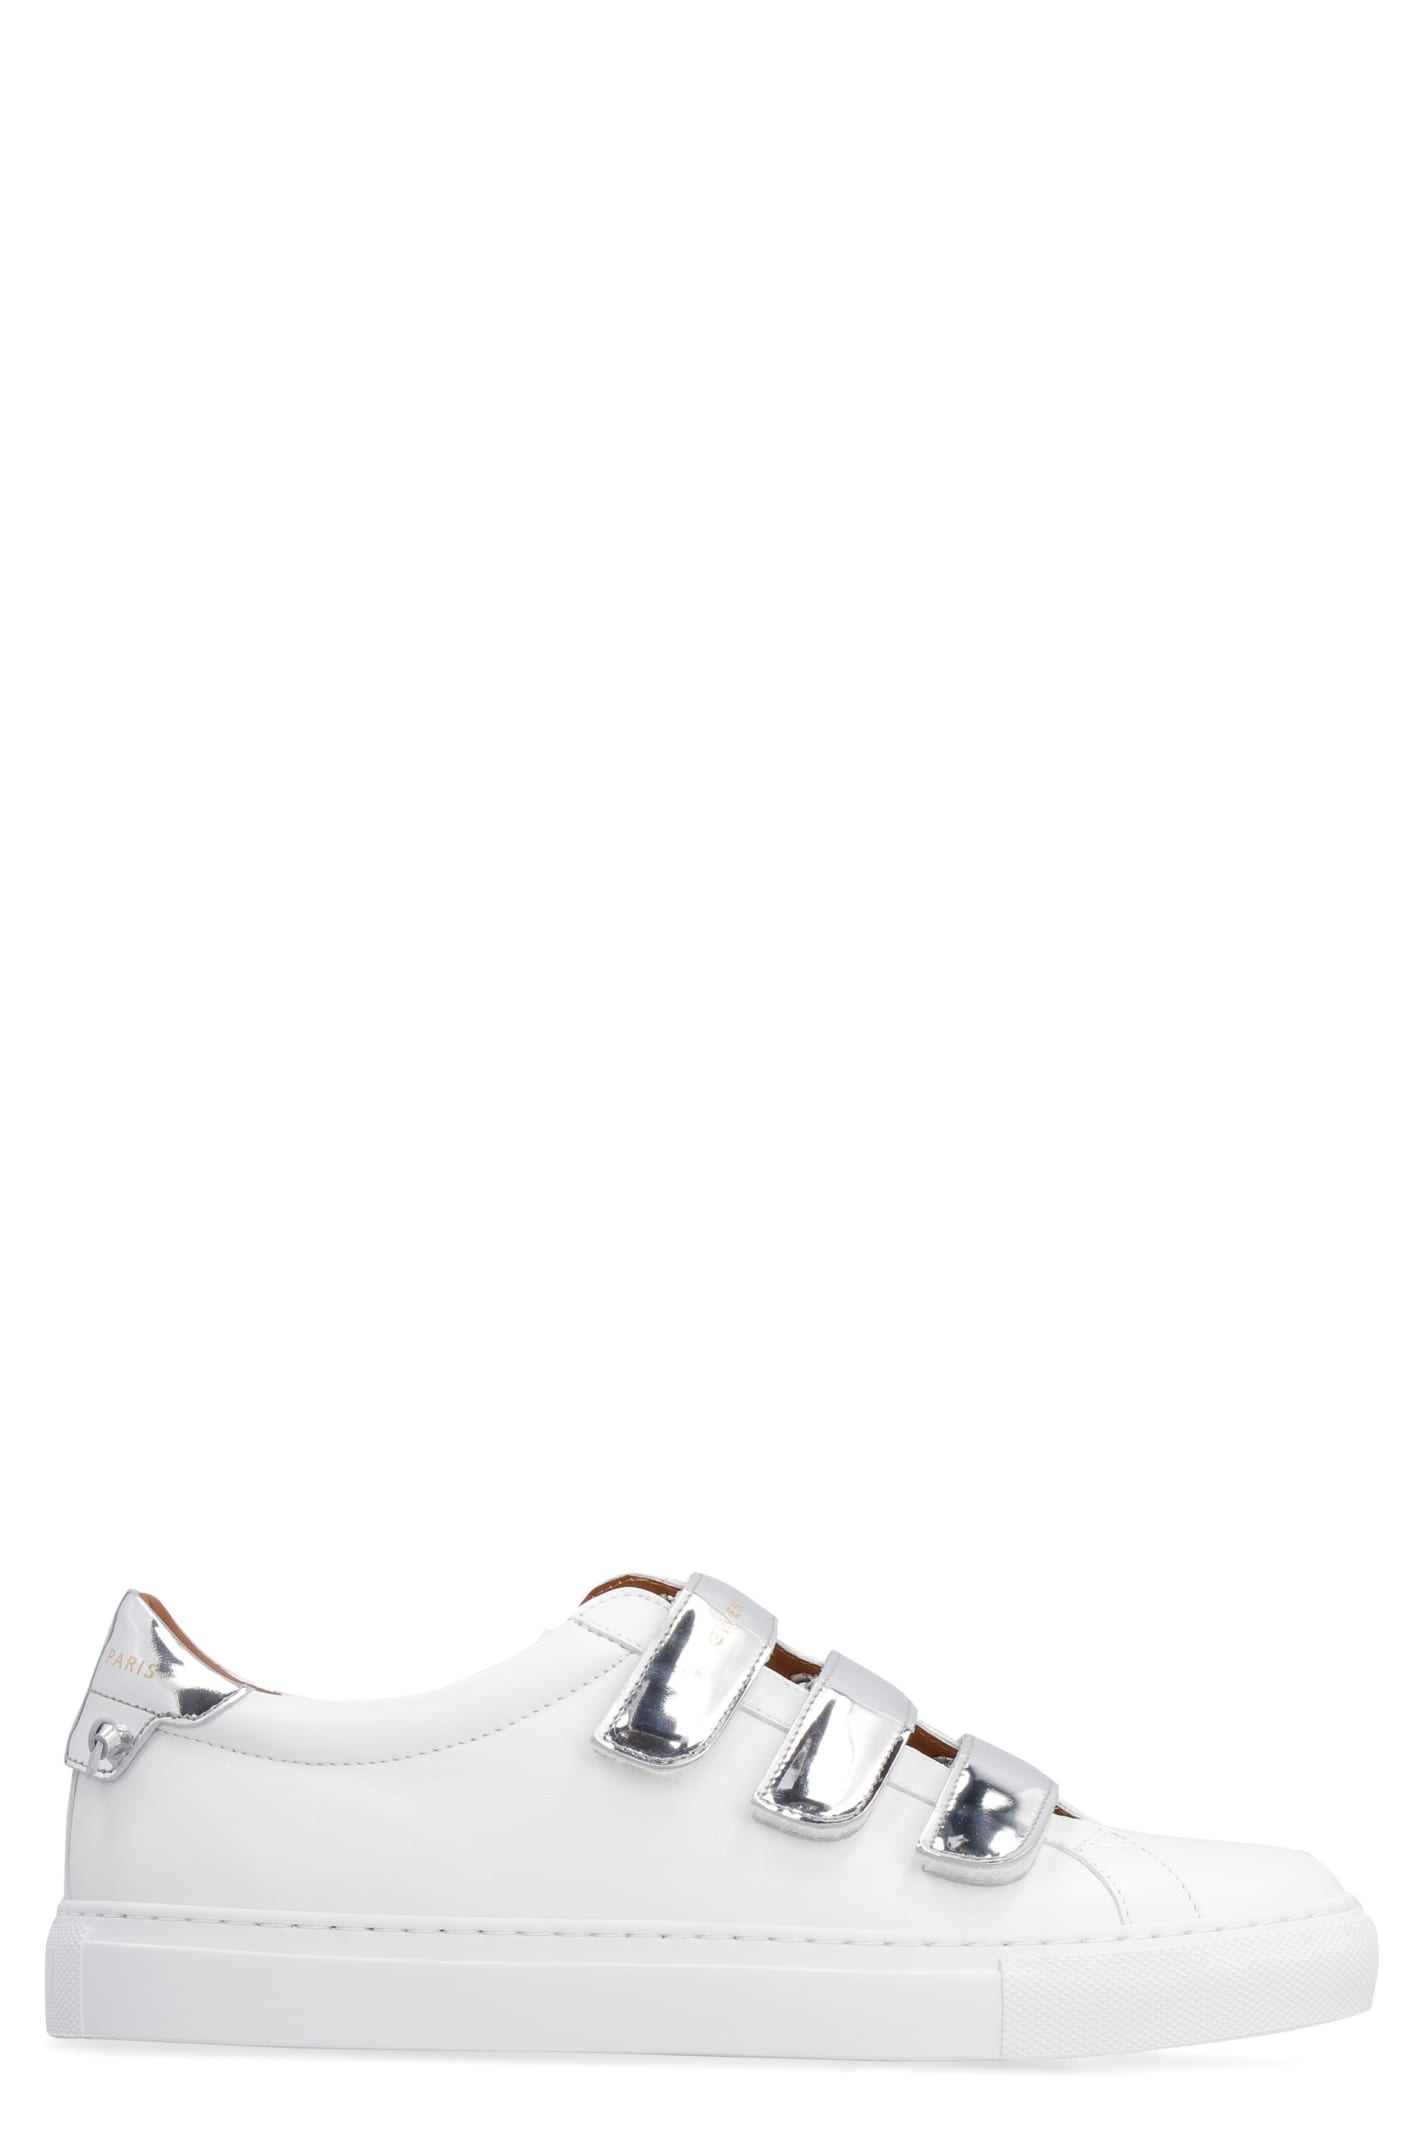 GIVENCHY URBAN STREET LEATHER LOW-TOP SNEAKERS,11298717